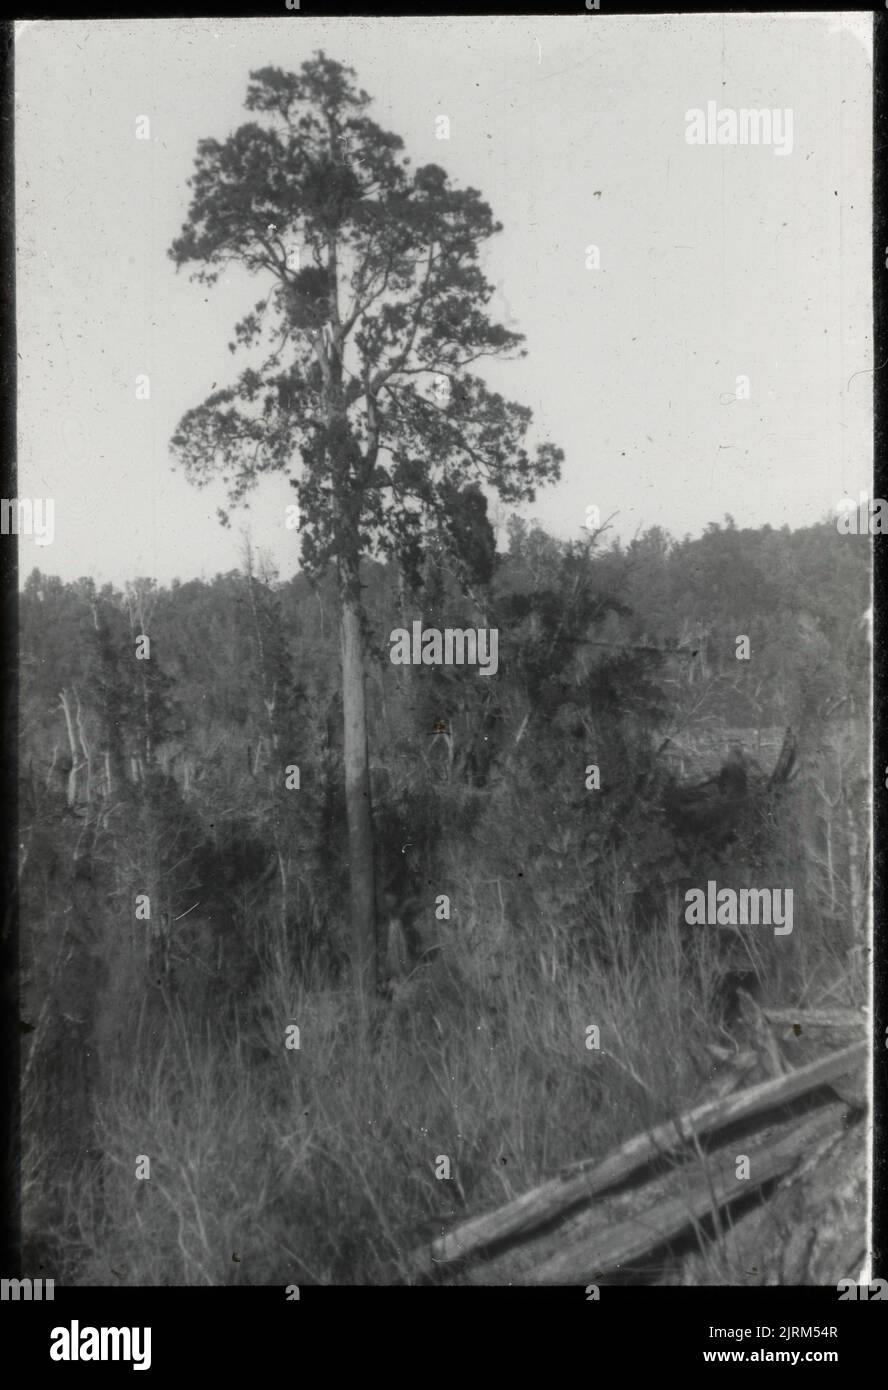 A rimu or red pine (Dacrydium cupressinum) in valley of Ohau River, Tararua Range, 27 August 1916, North Island, by Leslie Adkin. Gift of Adkin Family, 1997. Stock Photo